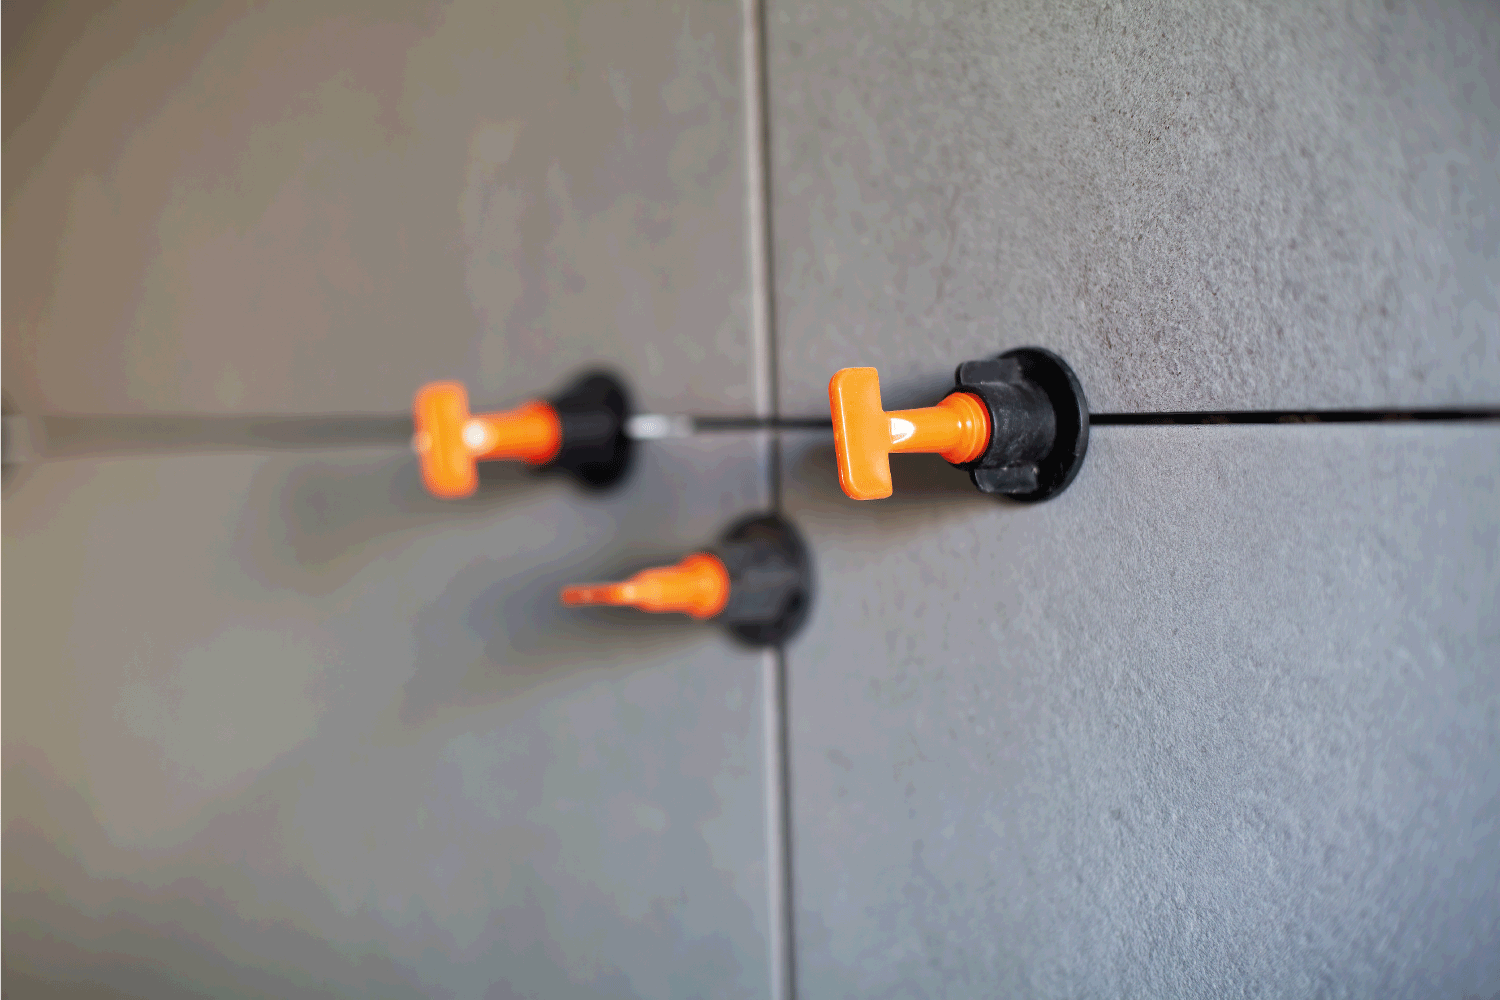 orange leveling spacers used on newly installed wall tile pieces